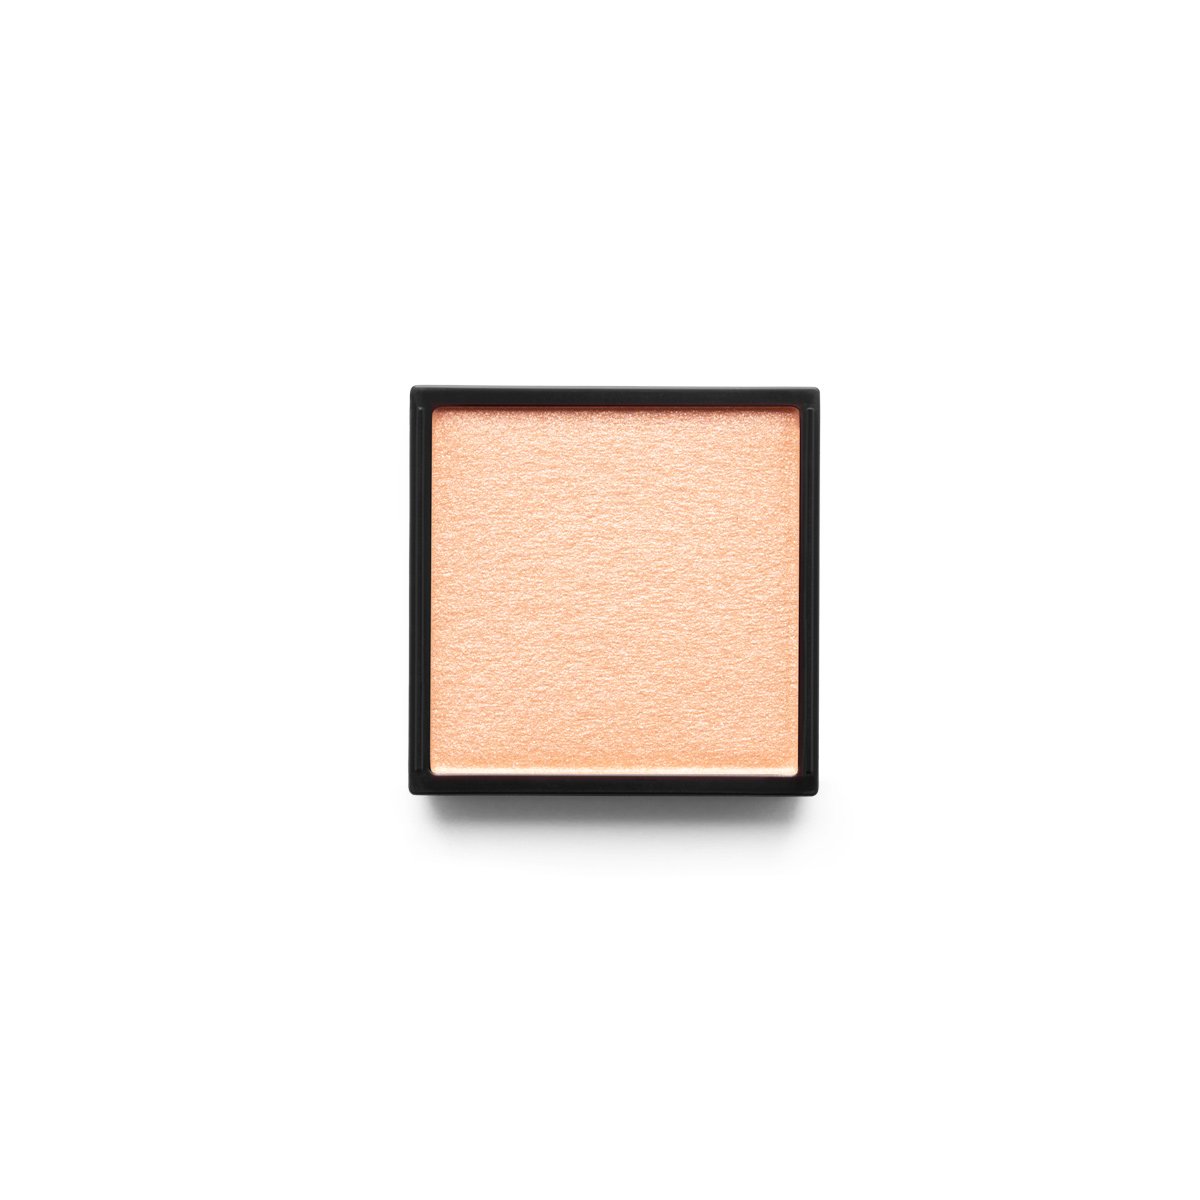 IDEALISTE - SPARKLING CHAMPAGNE - satin shimmer finish eyeshadow in sparkling champagne shade